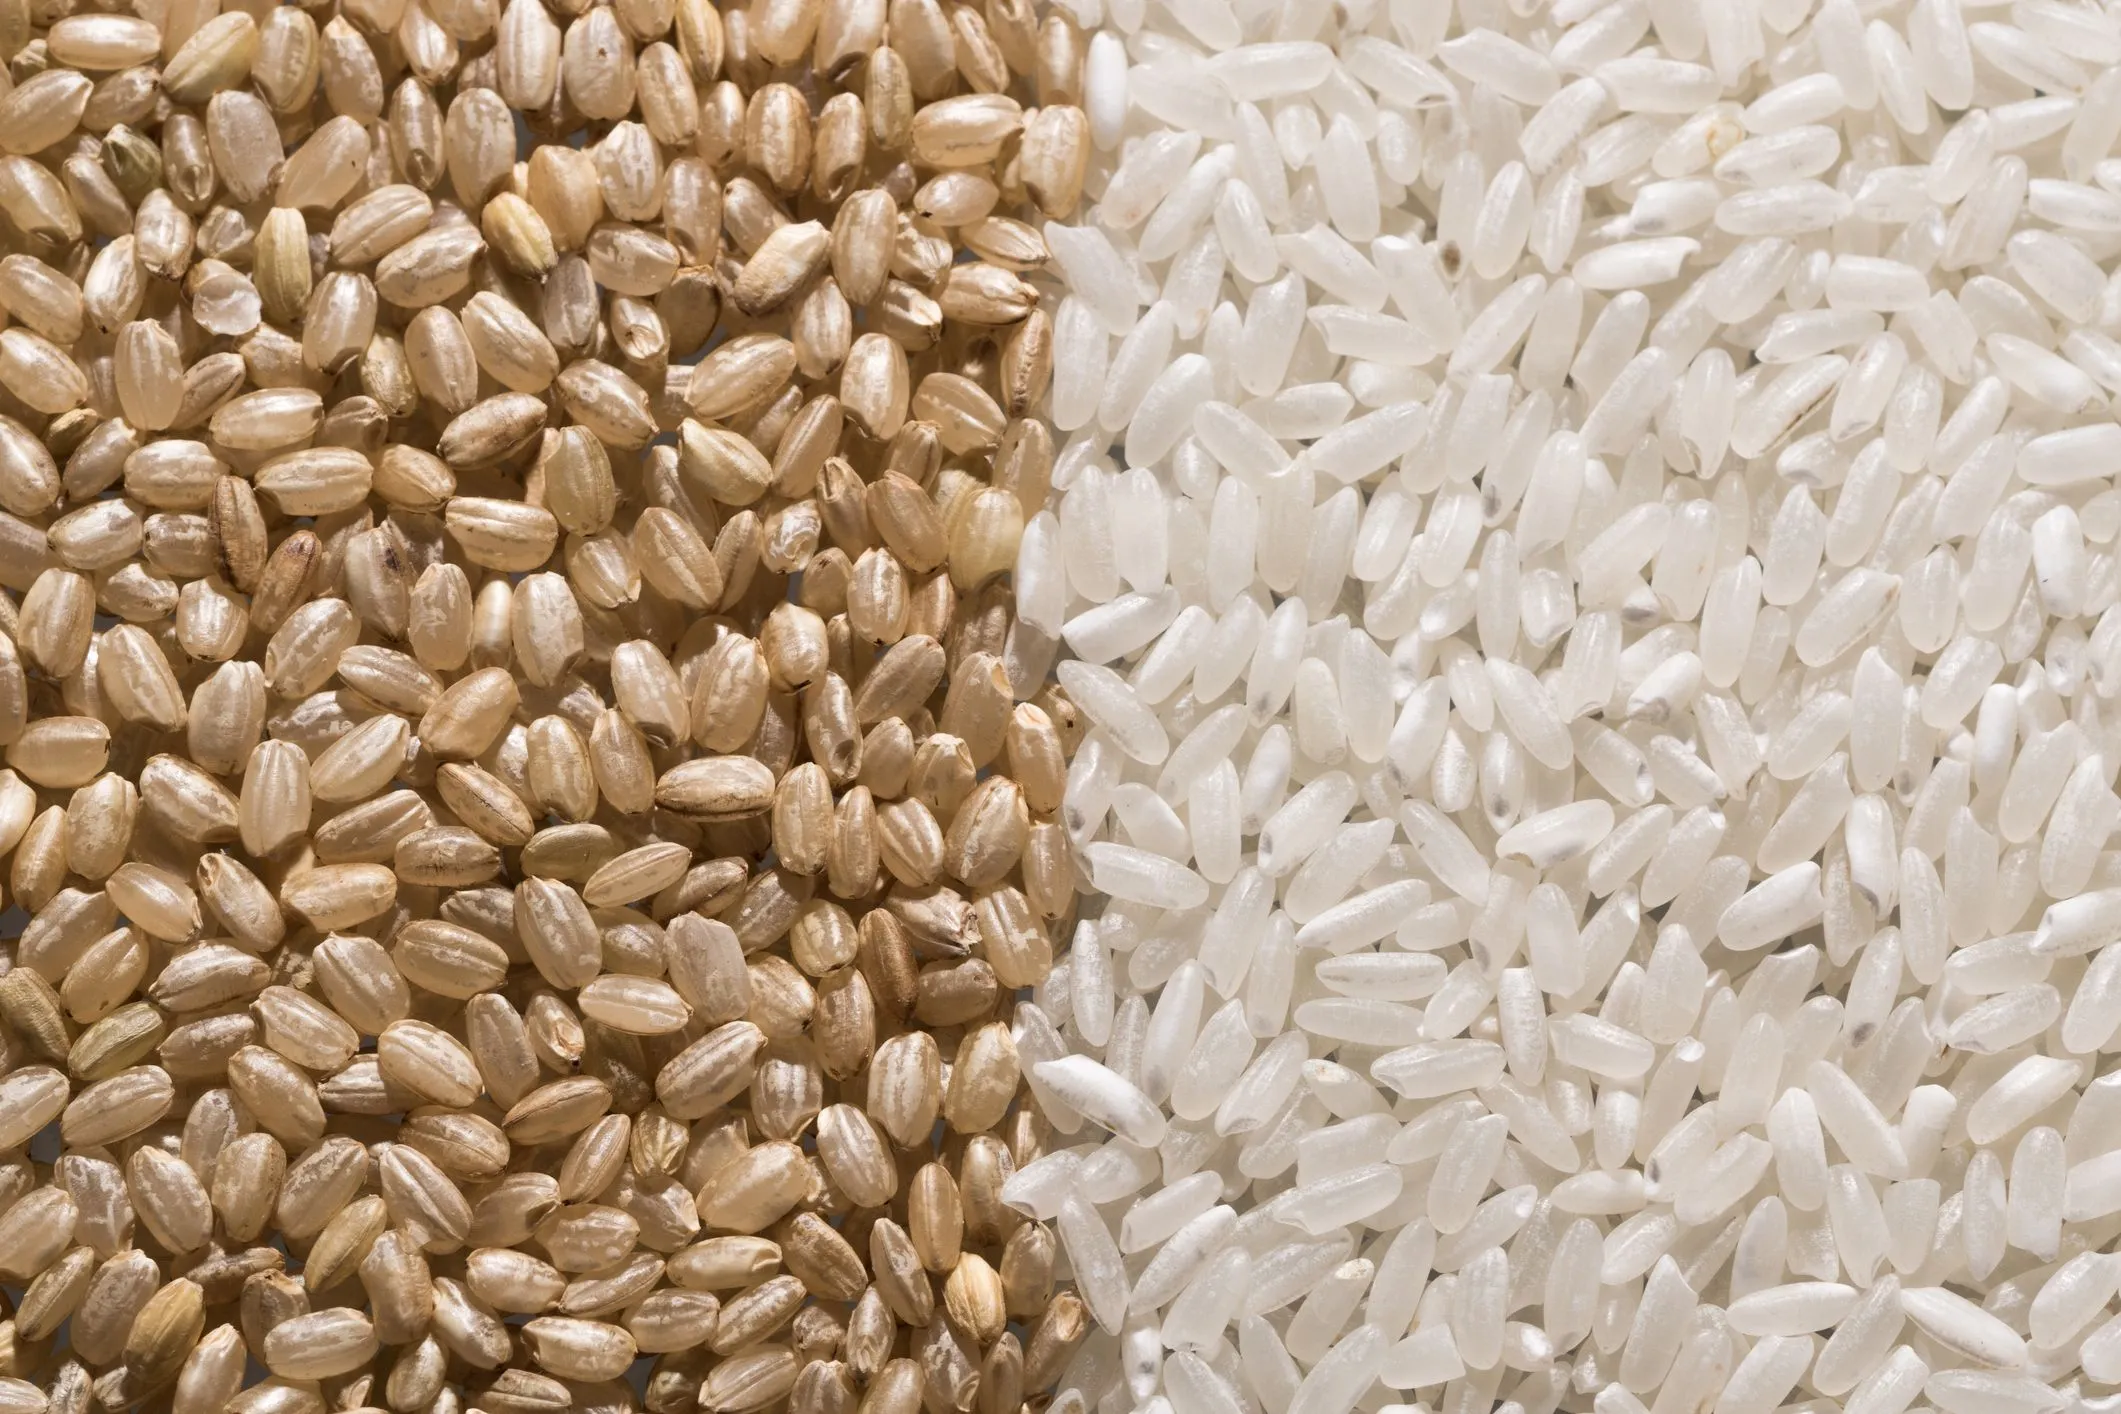 A comparison between white and brown rice, highlighting their nutritional differences and health benefits.